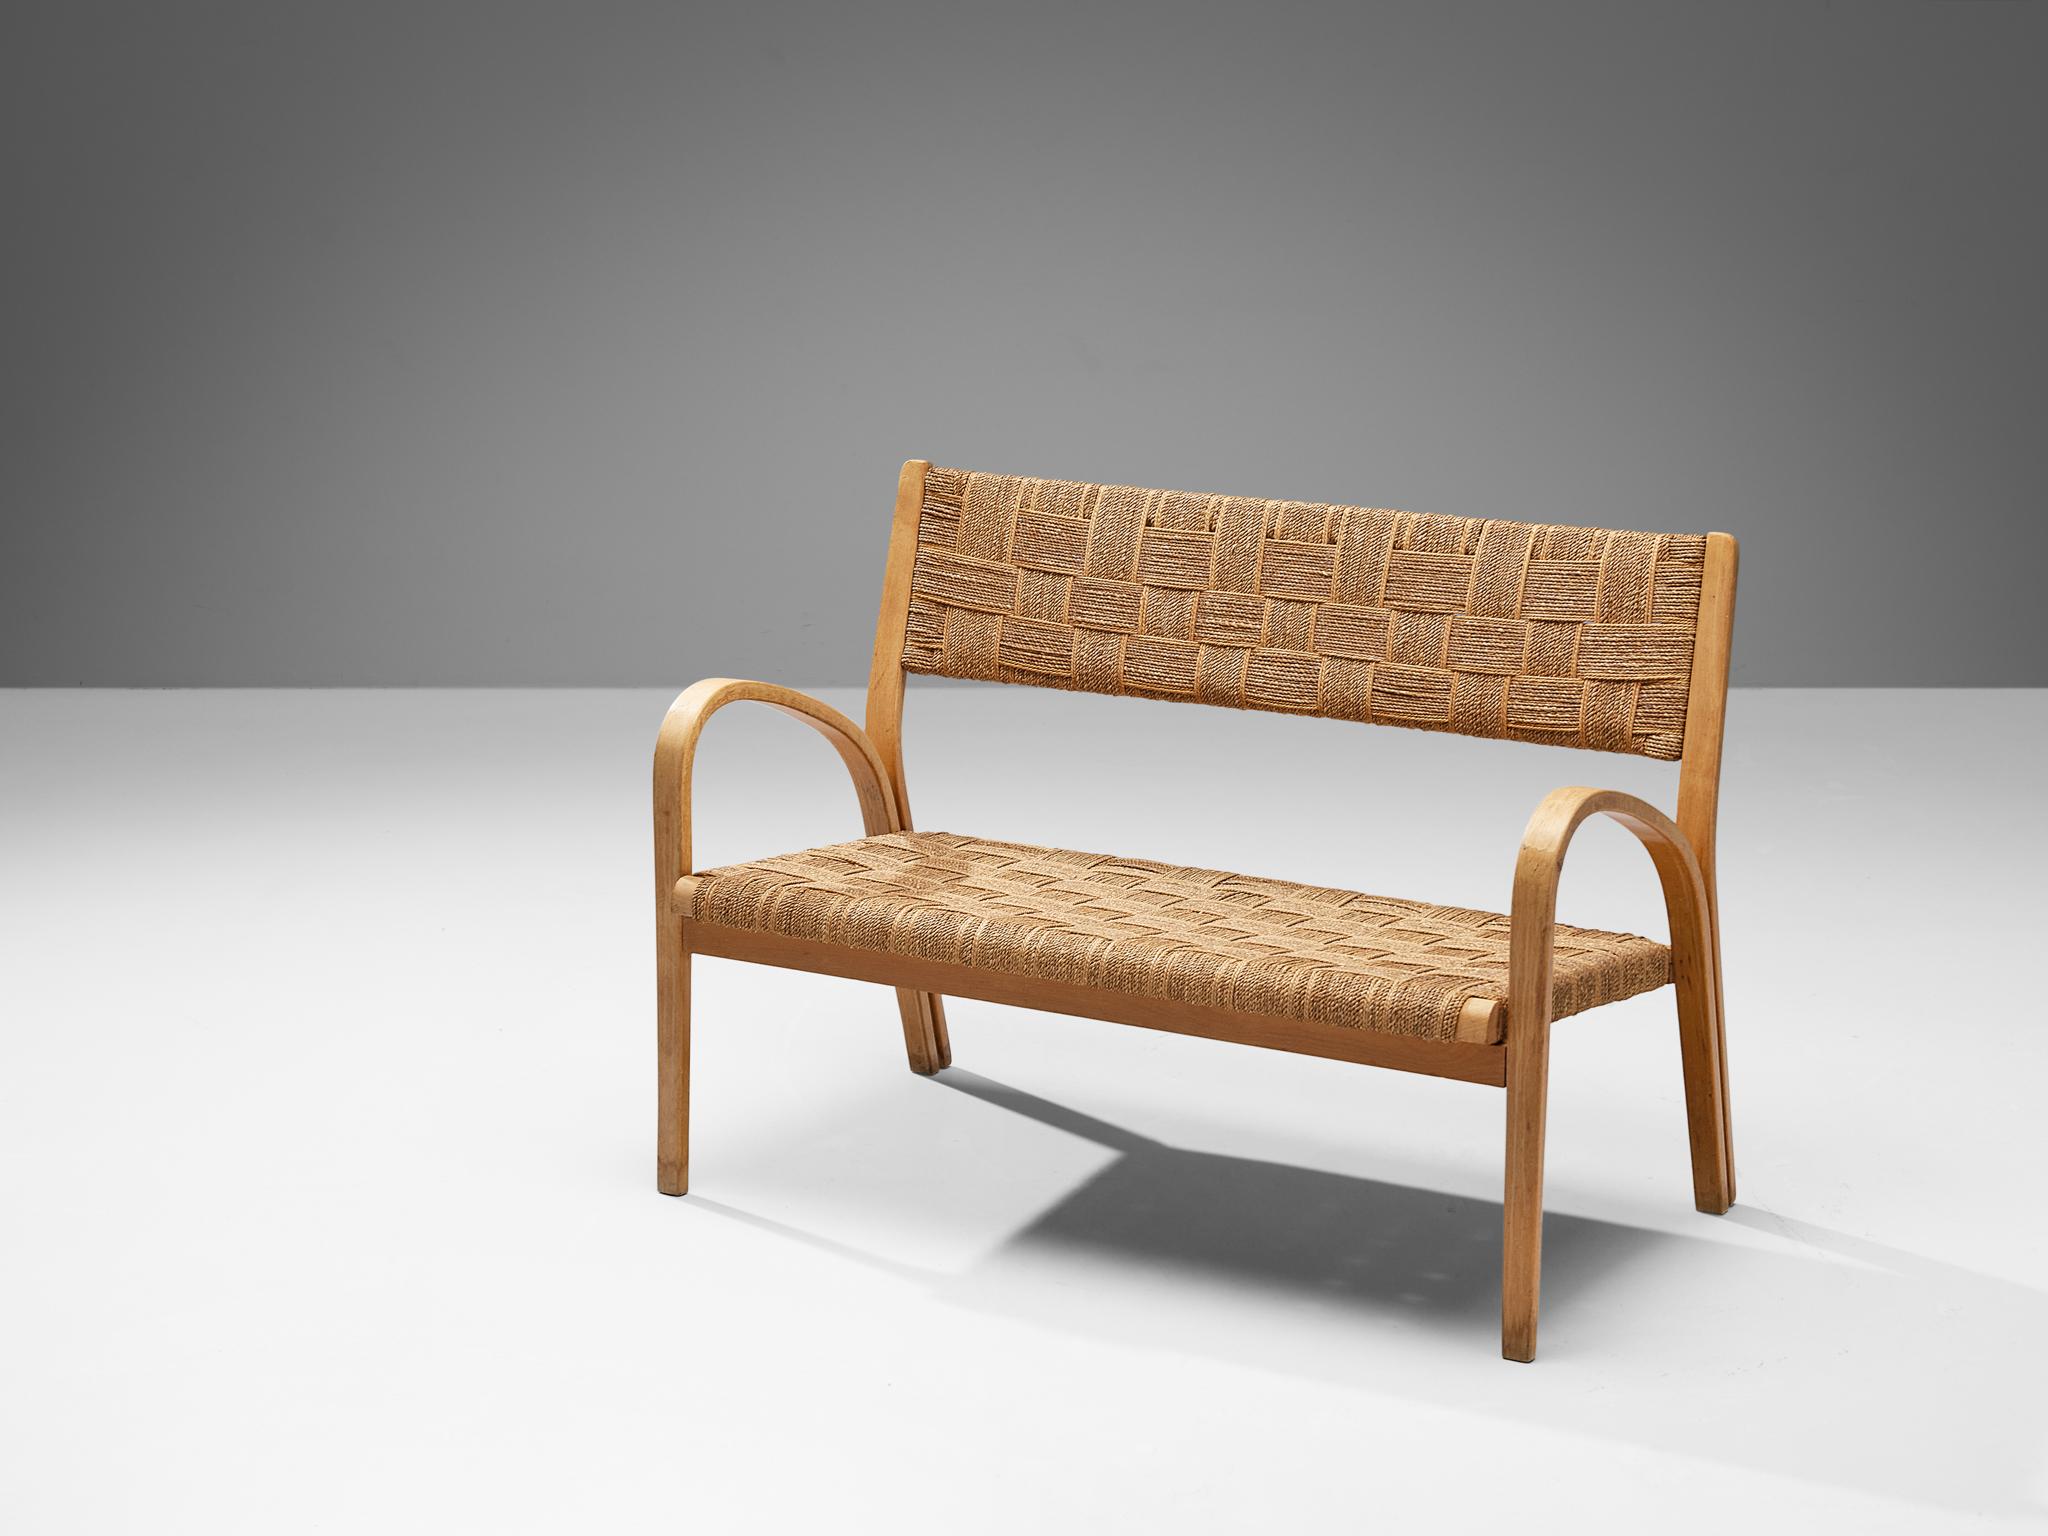 Augusto Romano, bench, beech, braided straw, Italy, circa 1948 

A rare side bench designed by Italian designer Augusto Romano around 1948. A well-executed design that features a frame in wood with a border that is meticulously adorned with braided